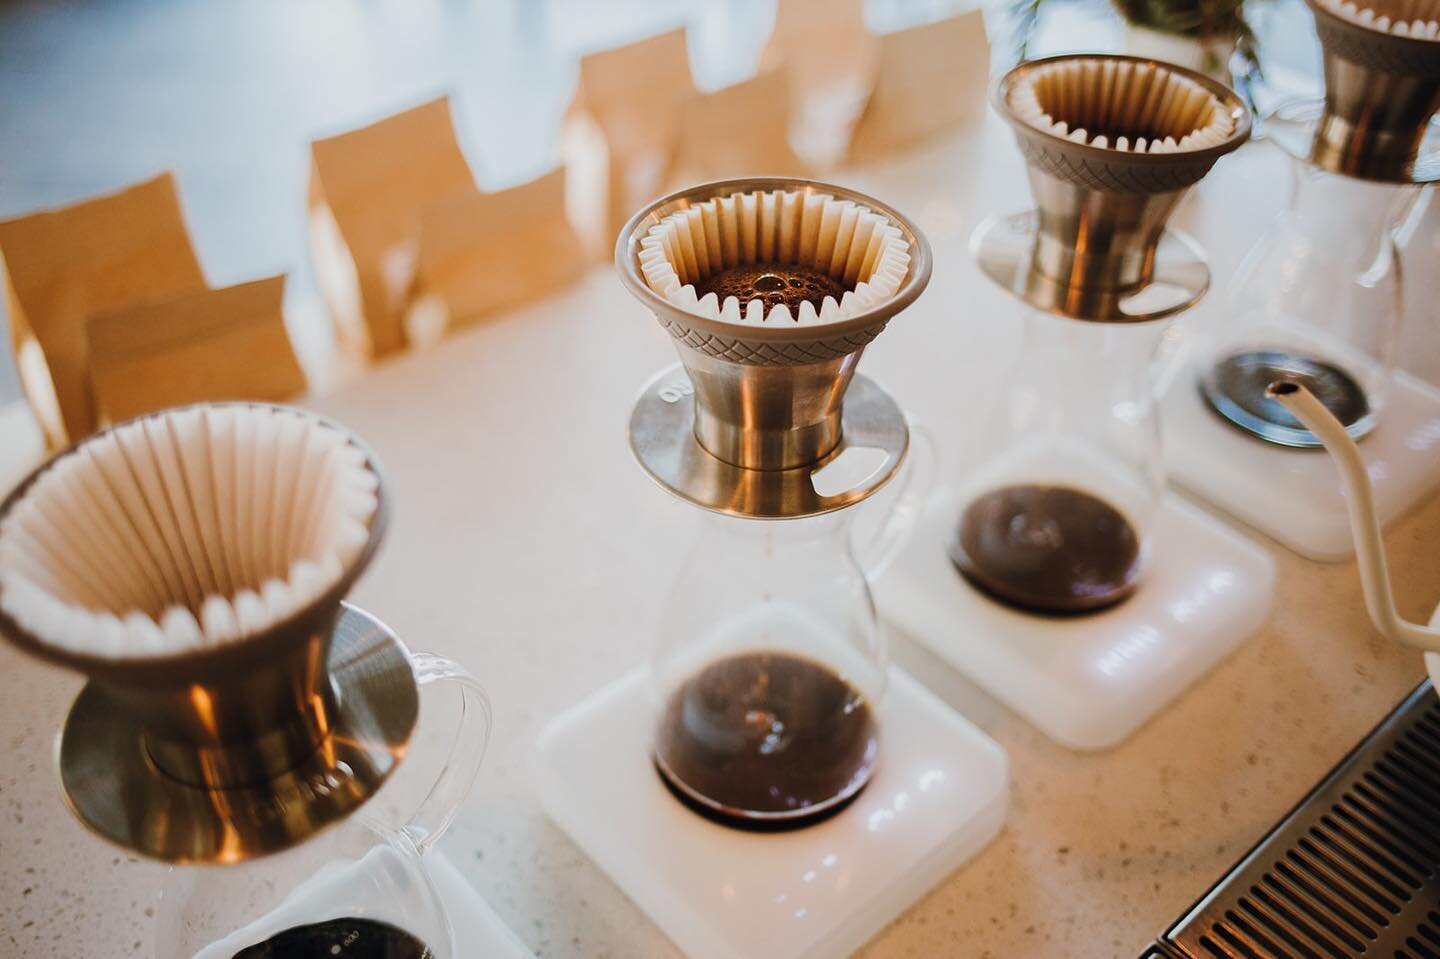 The Bloom ~ Where all the magic happens ⁠
⁠
Why is it our favorite part of the pourover coffee process? ⁠
✨ It's the first pour of water &amp; most important⁠
✨ The flavor is enhanced because the bloom allows the coffee to aerate and release gases th